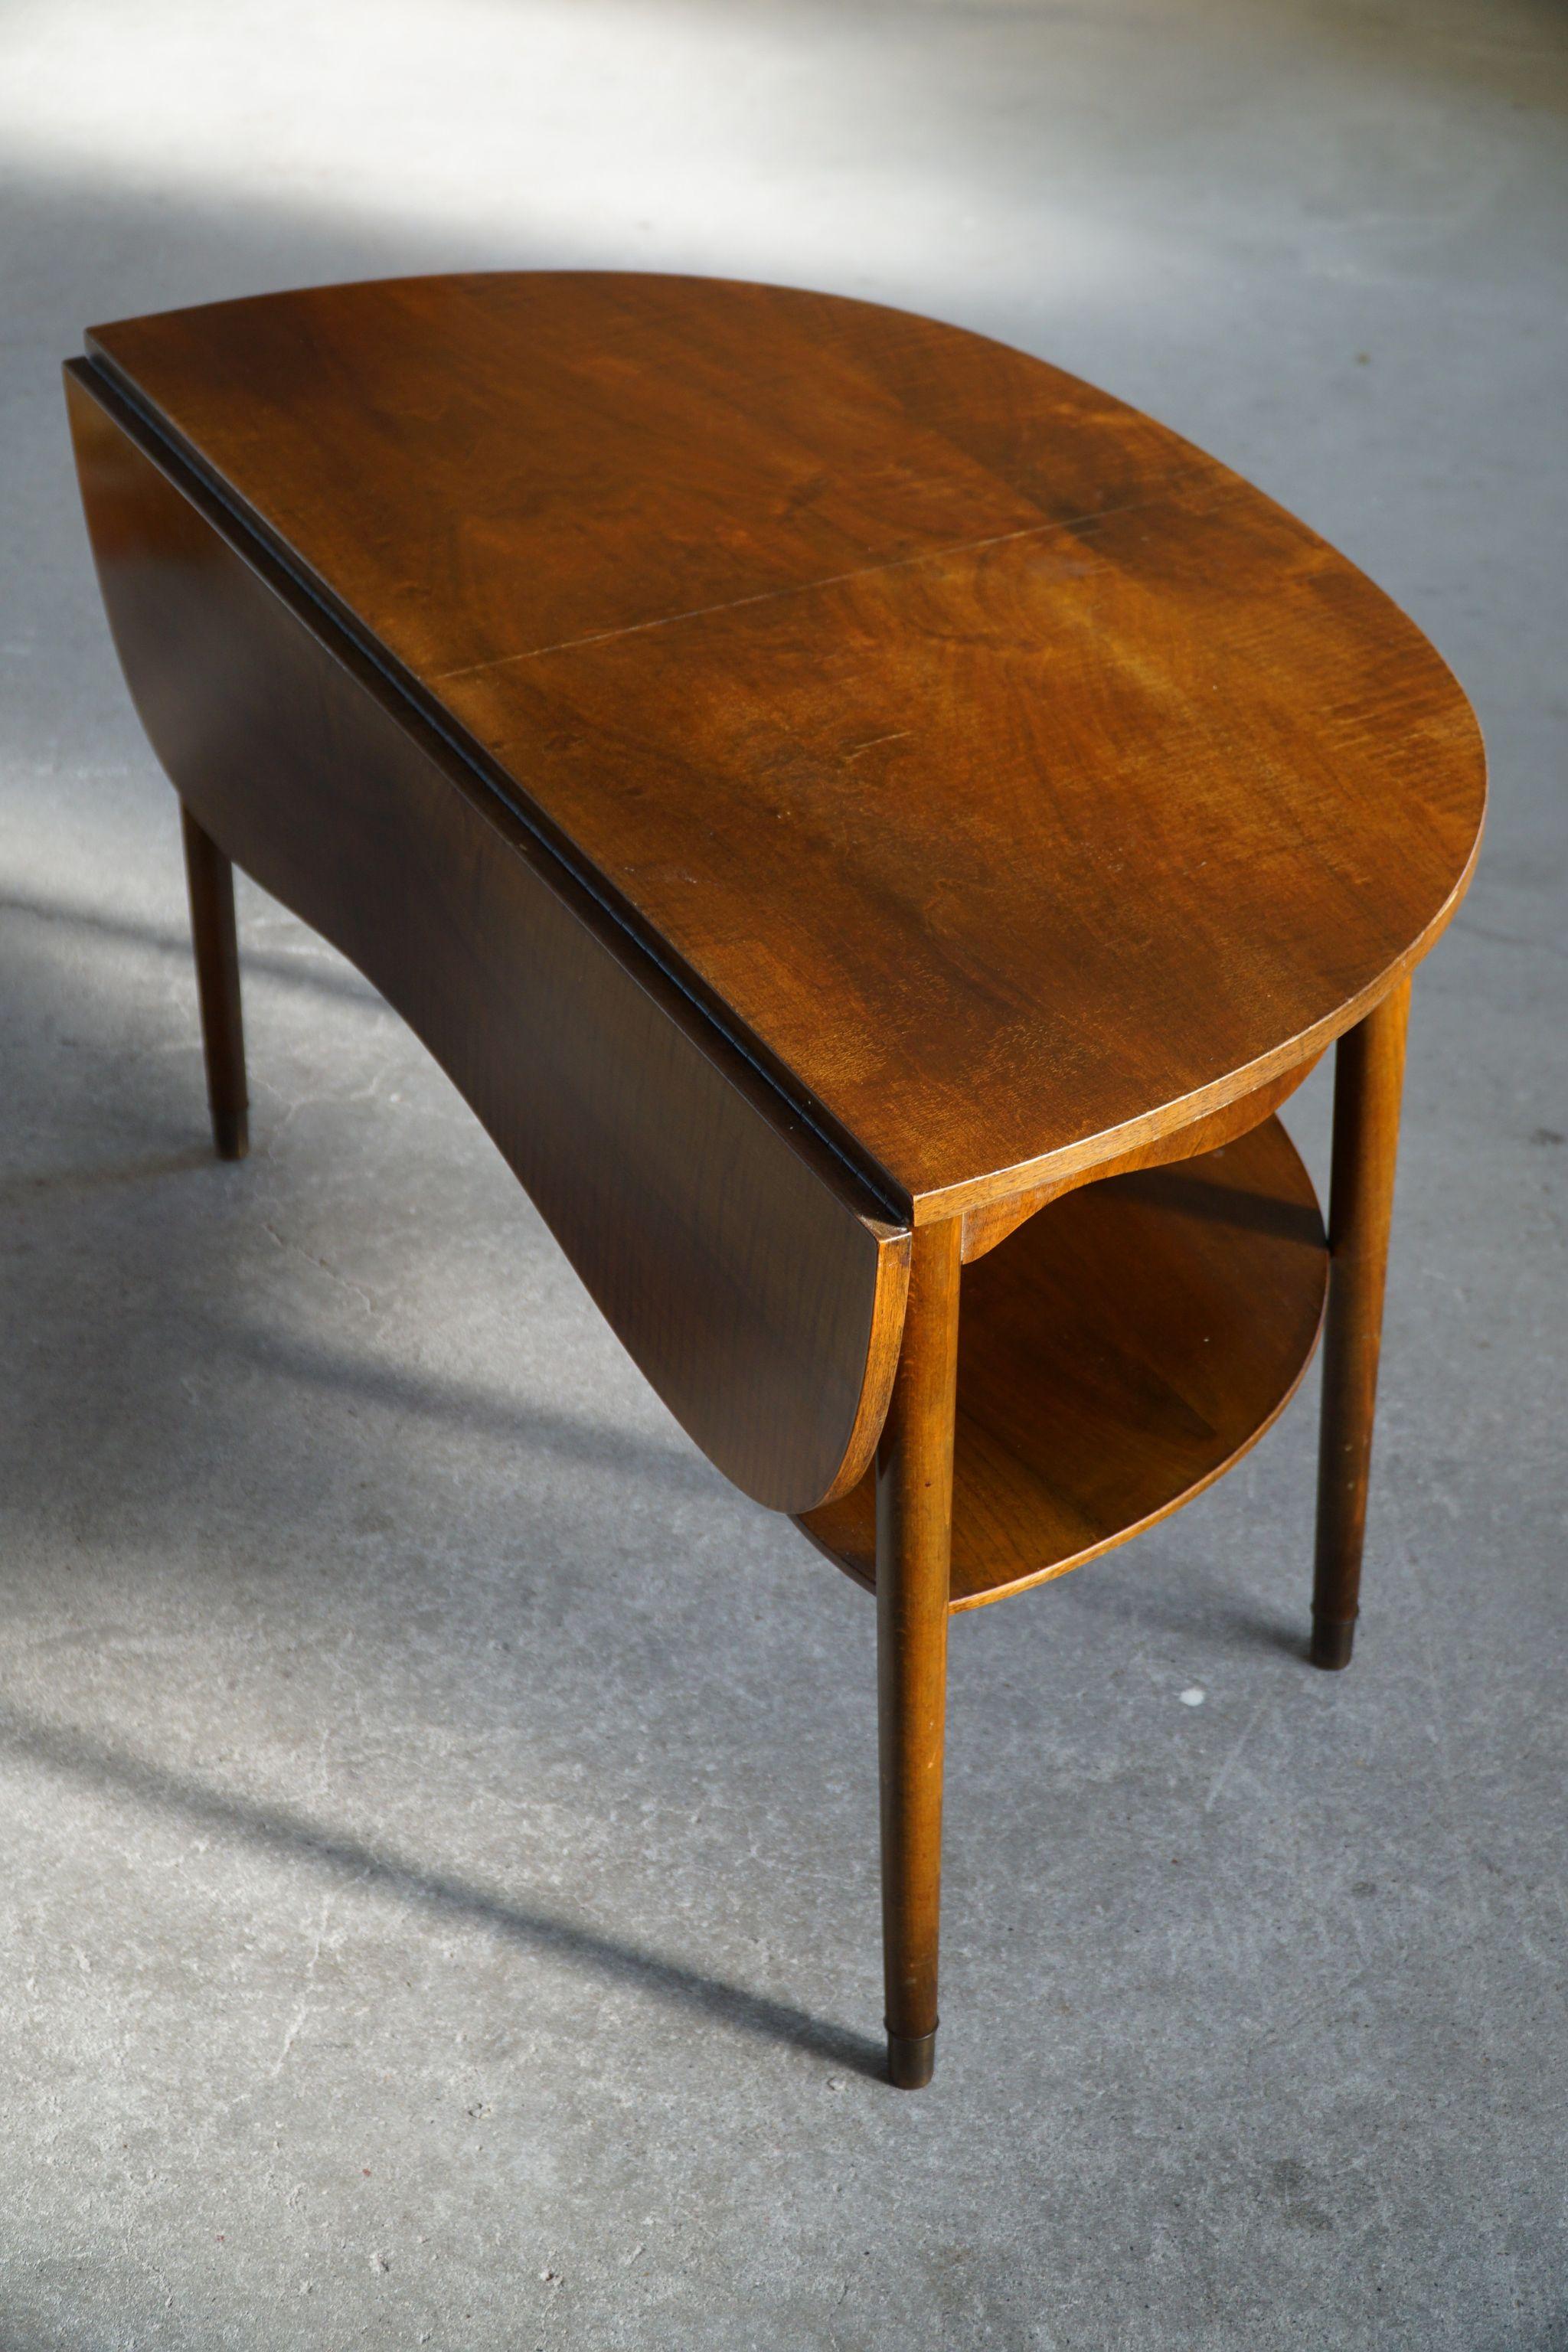 A classic Danish drop leaf coffee table in walnut with brass shoes. Made by designer Anton Kildeberg for Anton Kildeberg Furniture in 1960s.

This piece is in a great vintage condition.

With a heavy focus on functionality, this design style